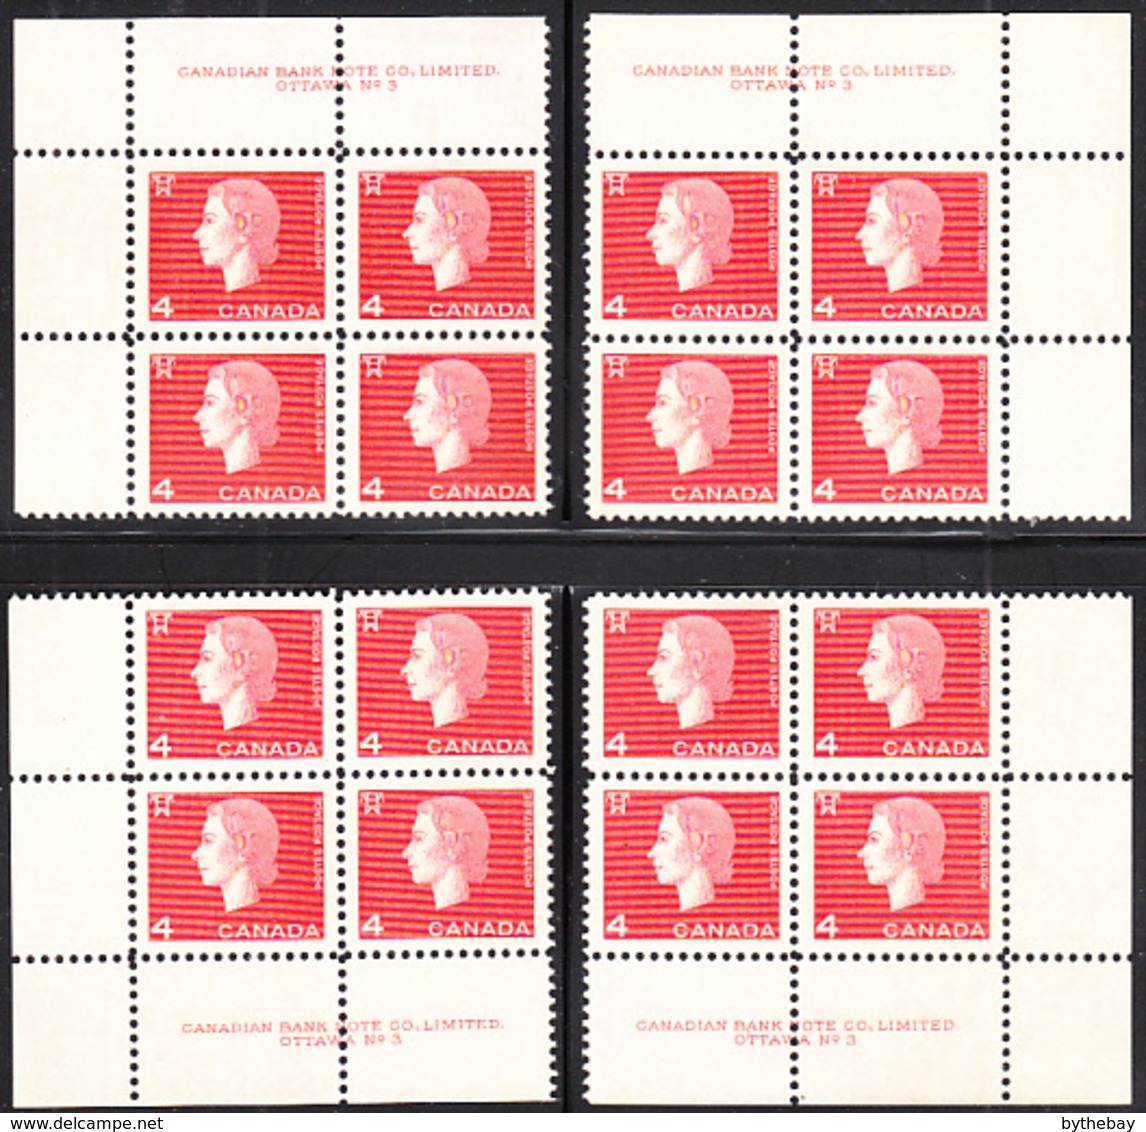 Canada 1963 MNH Sc #404 4c QEII Cameo Plate #3 Set Of 4 Blocks - Num. Planches & Inscriptions Marge